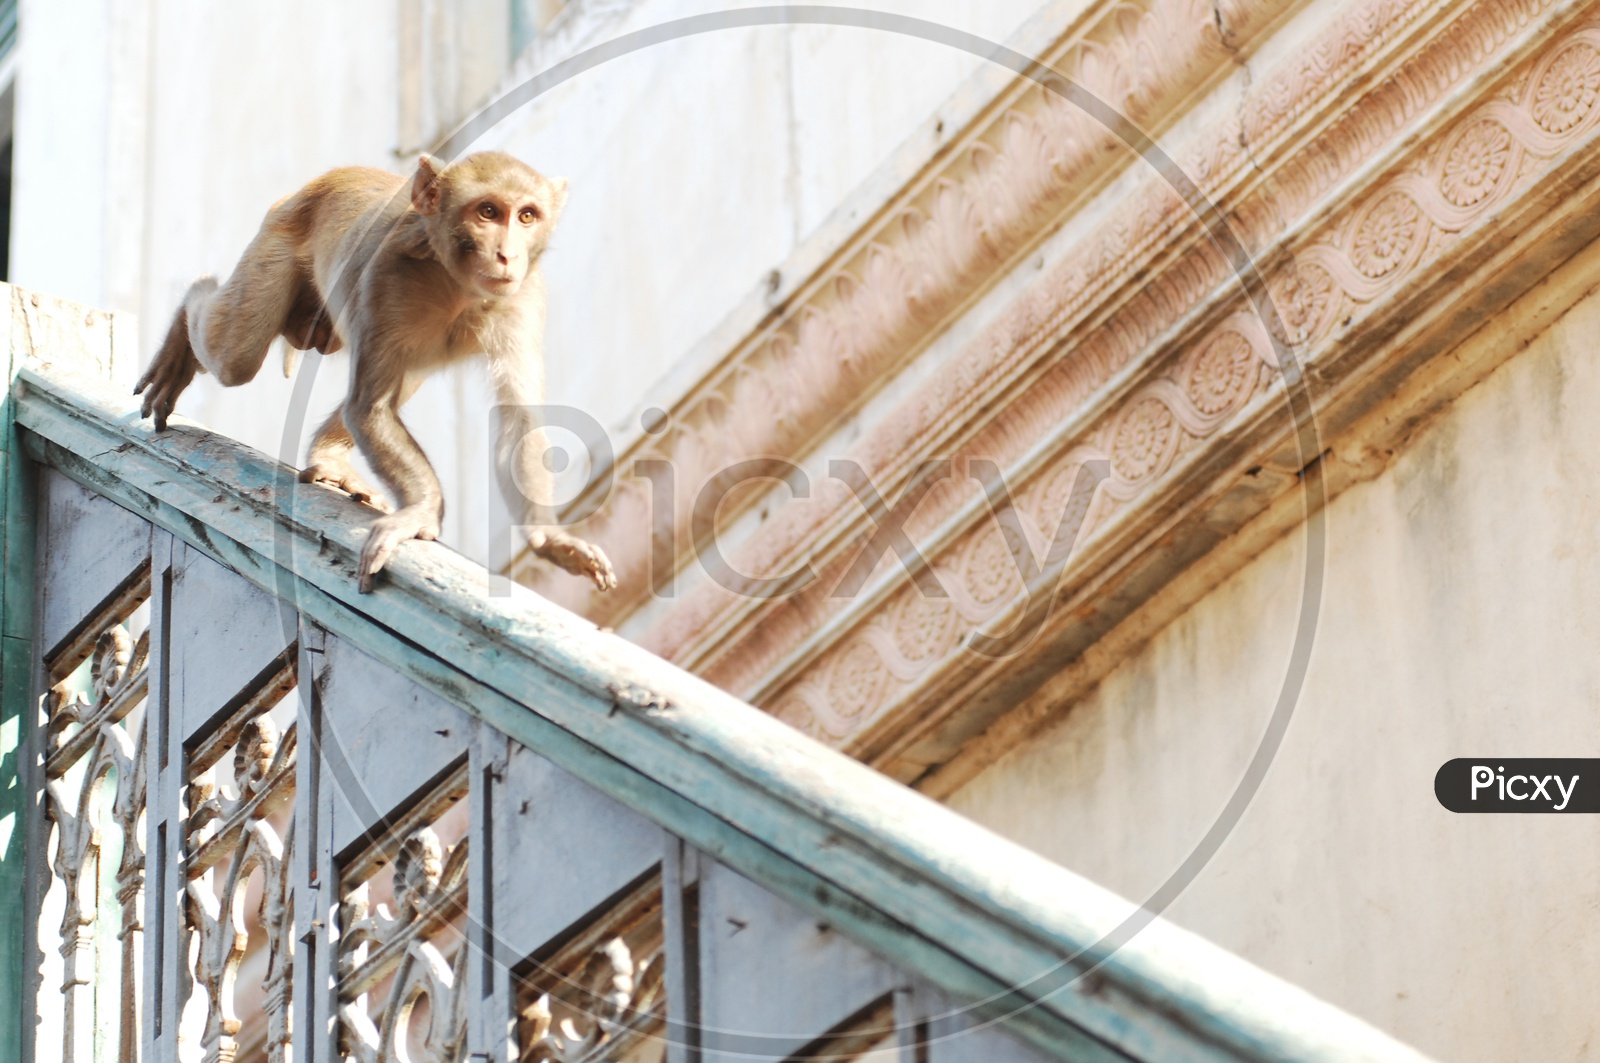 An Young Macaque Or Monkey Running On a Wall